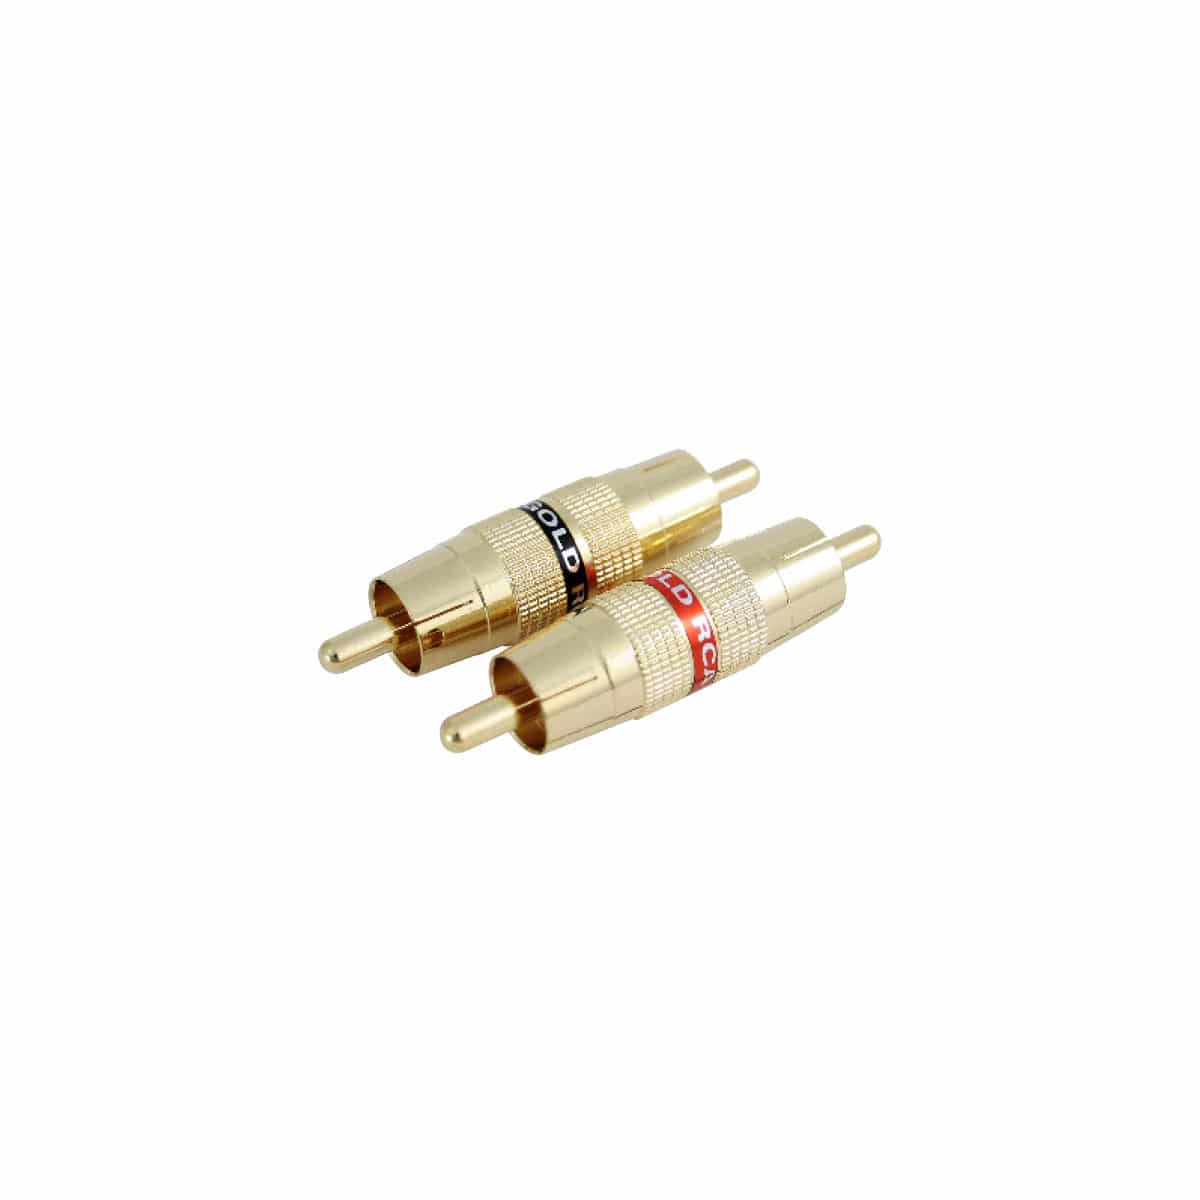 DB Link Male to Male Barrel Connector with Gold RCA Tip and Grip 2 Pcs Per Pack